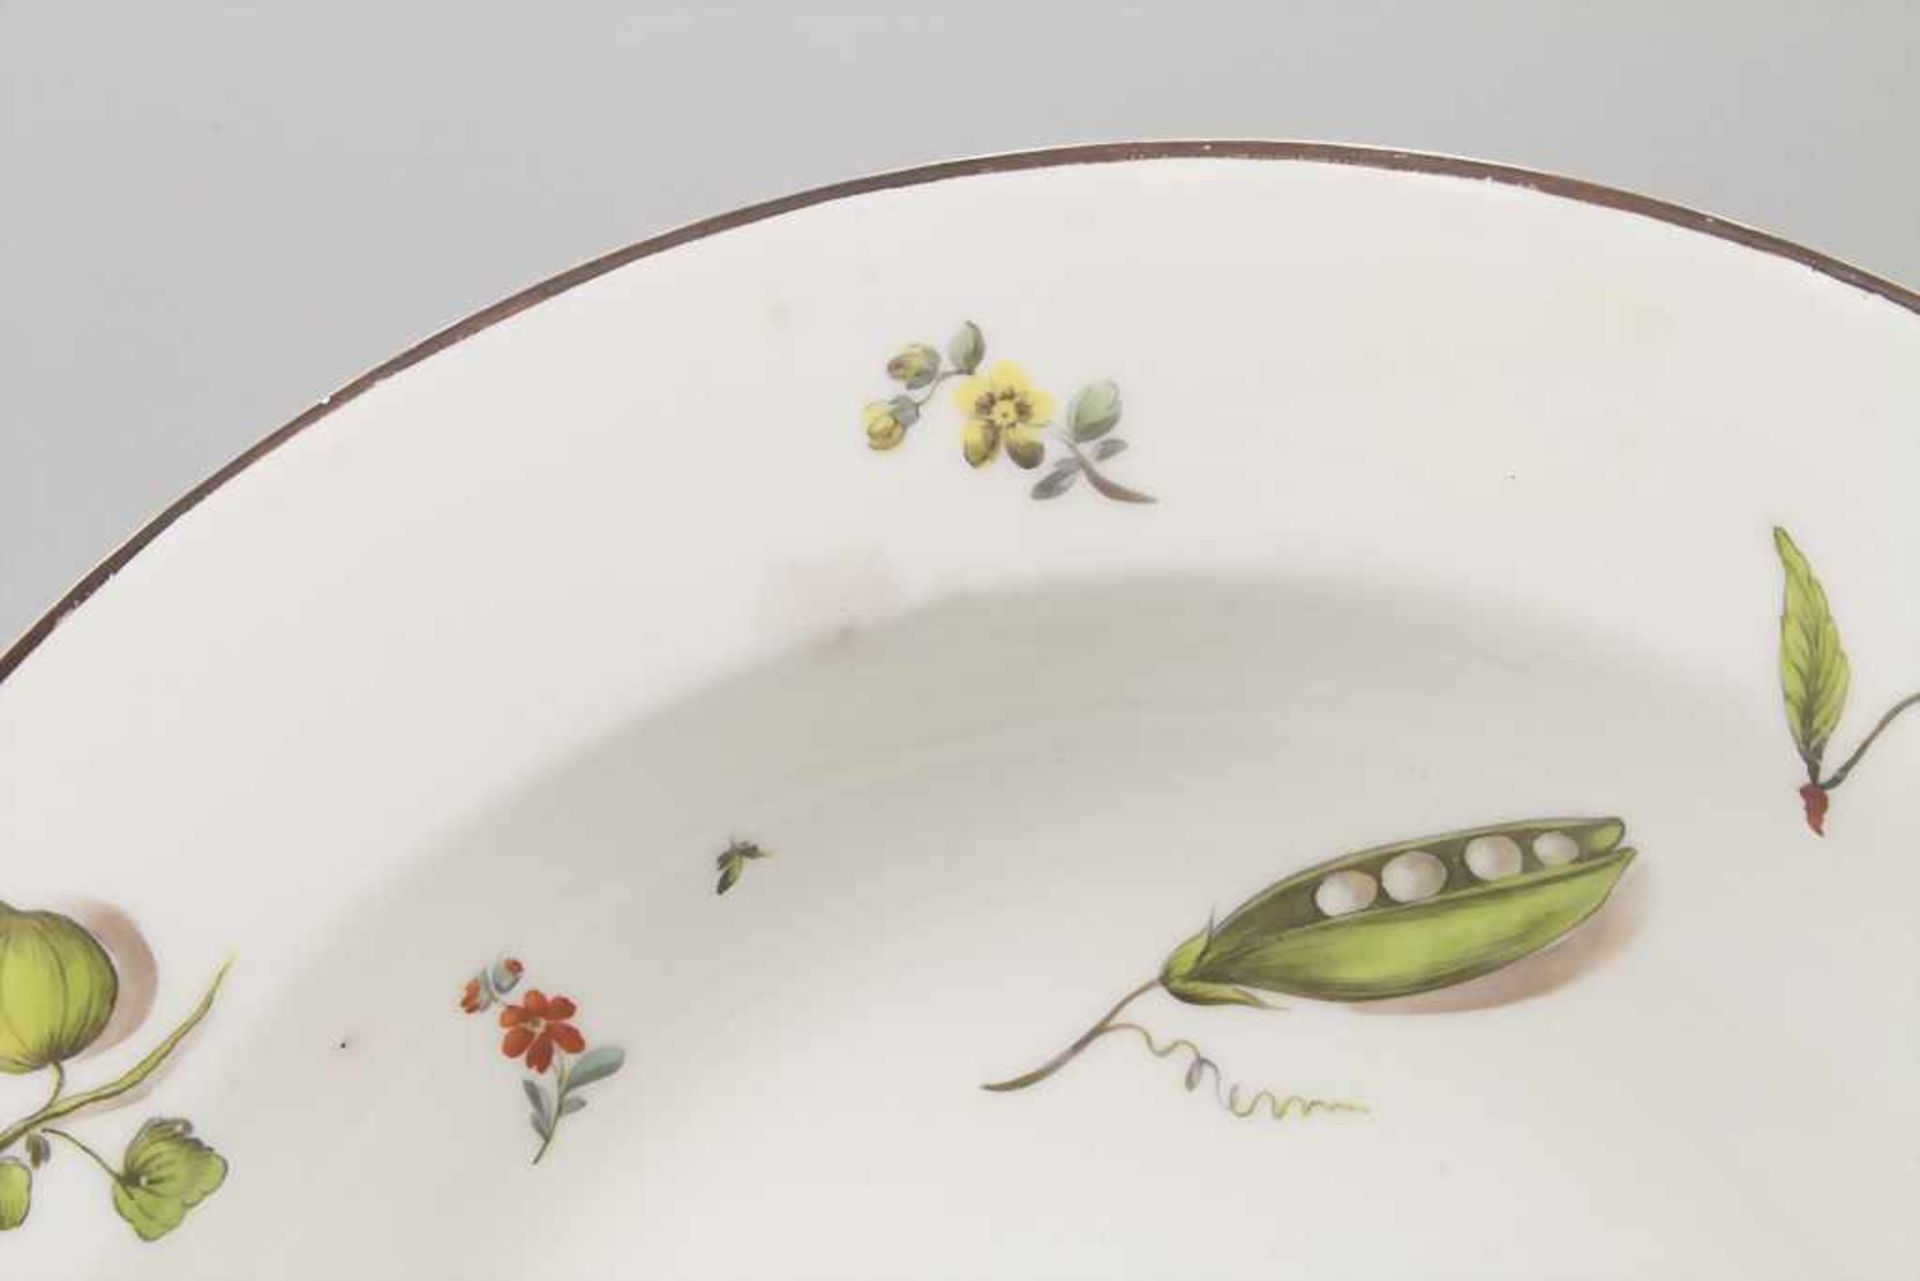 Suppenteller mit Gemüse-Dekor / A soup plate painted with vegetables, fruits and flowers, Wien, um - Image 3 of 5